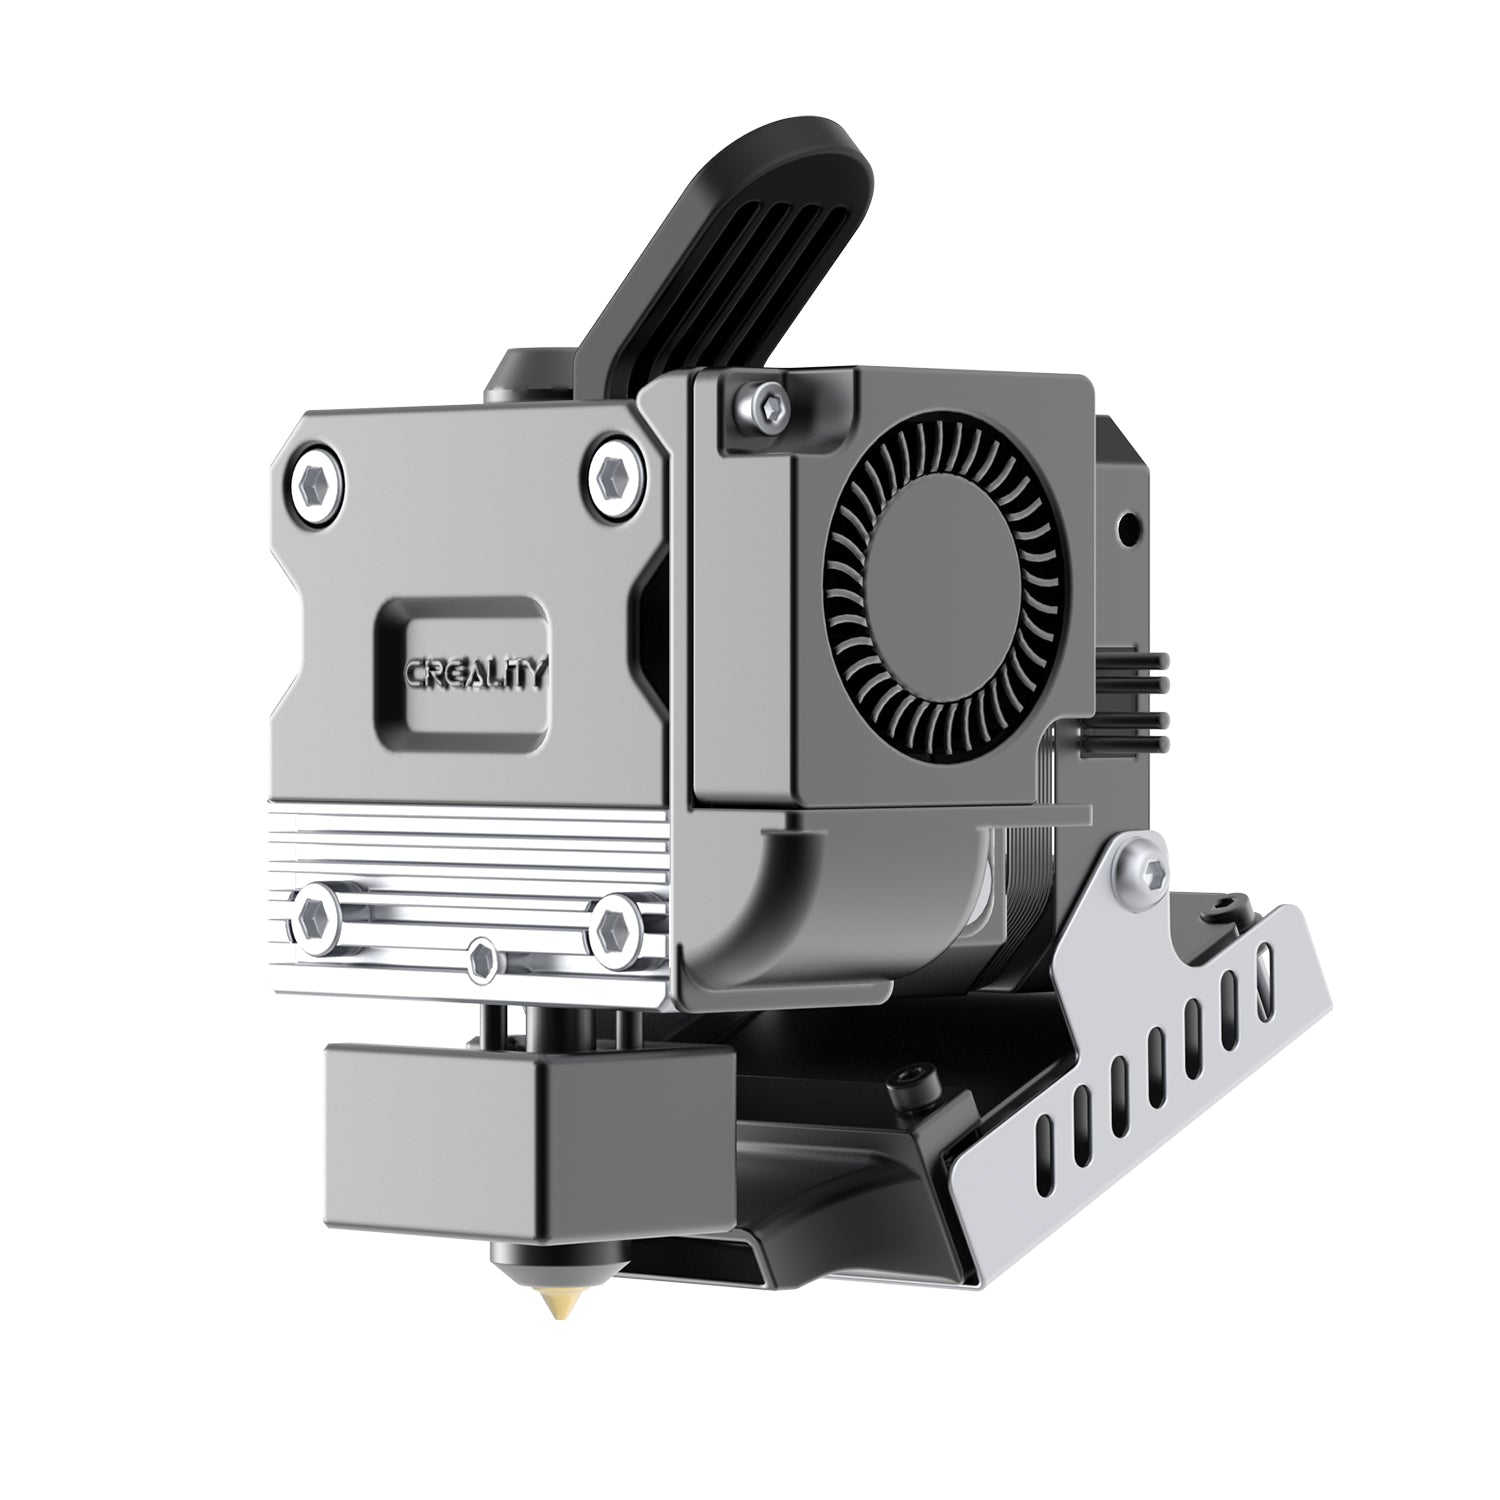 Creality 3D - Sprite Extruder 260°C - High Temperature Printing (Standard) - Ender-3 S1